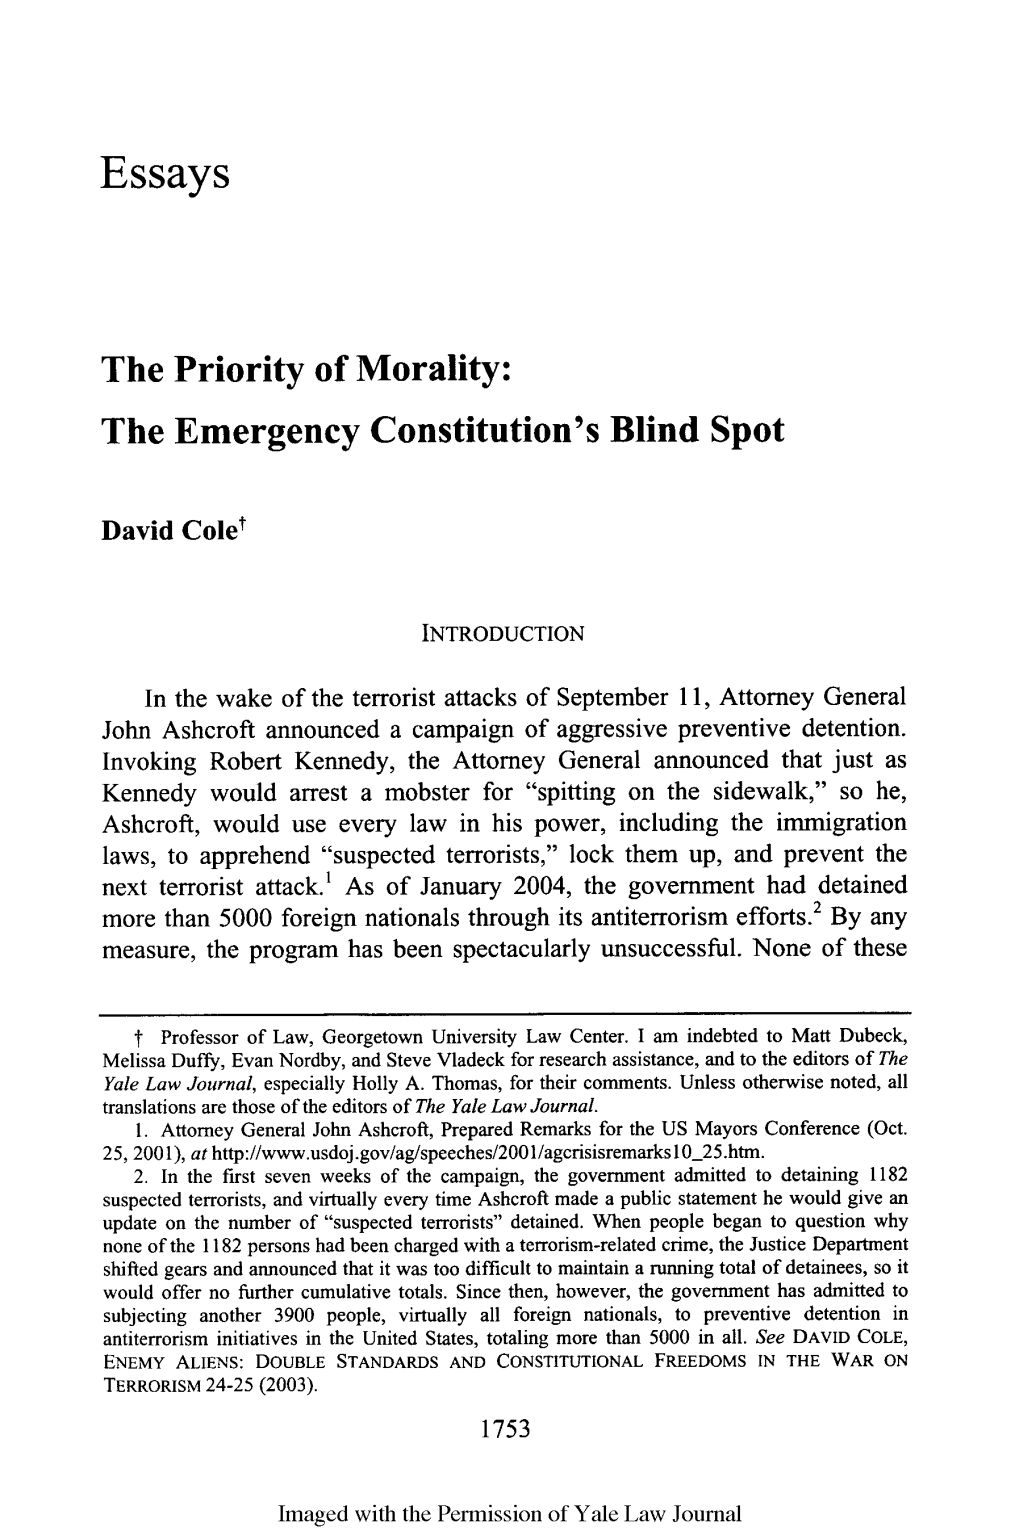 The Priority of Morality: the Emergency Constitution's Blind Spot